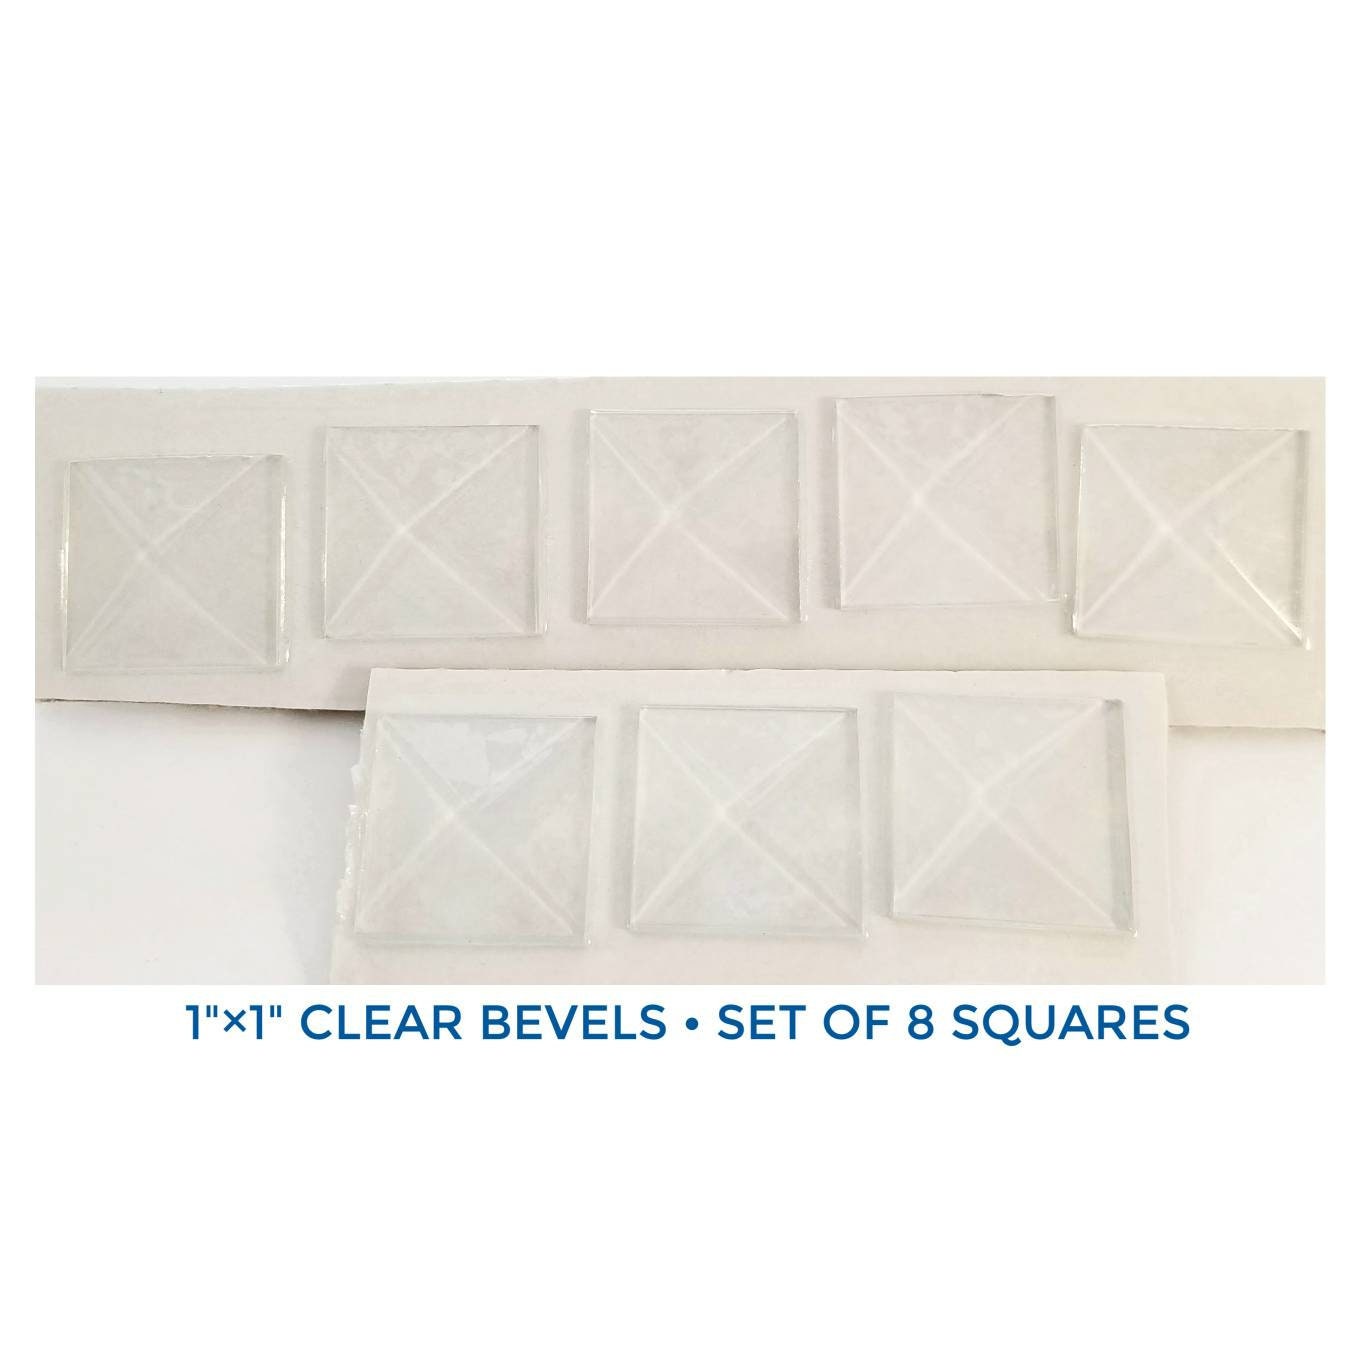 Glass Bevels, Square 1''x 1'' for Photo Charms. Memory Pendants. Craft Glass Squares. View in drop down menu, set of 8 or 16 pieces.